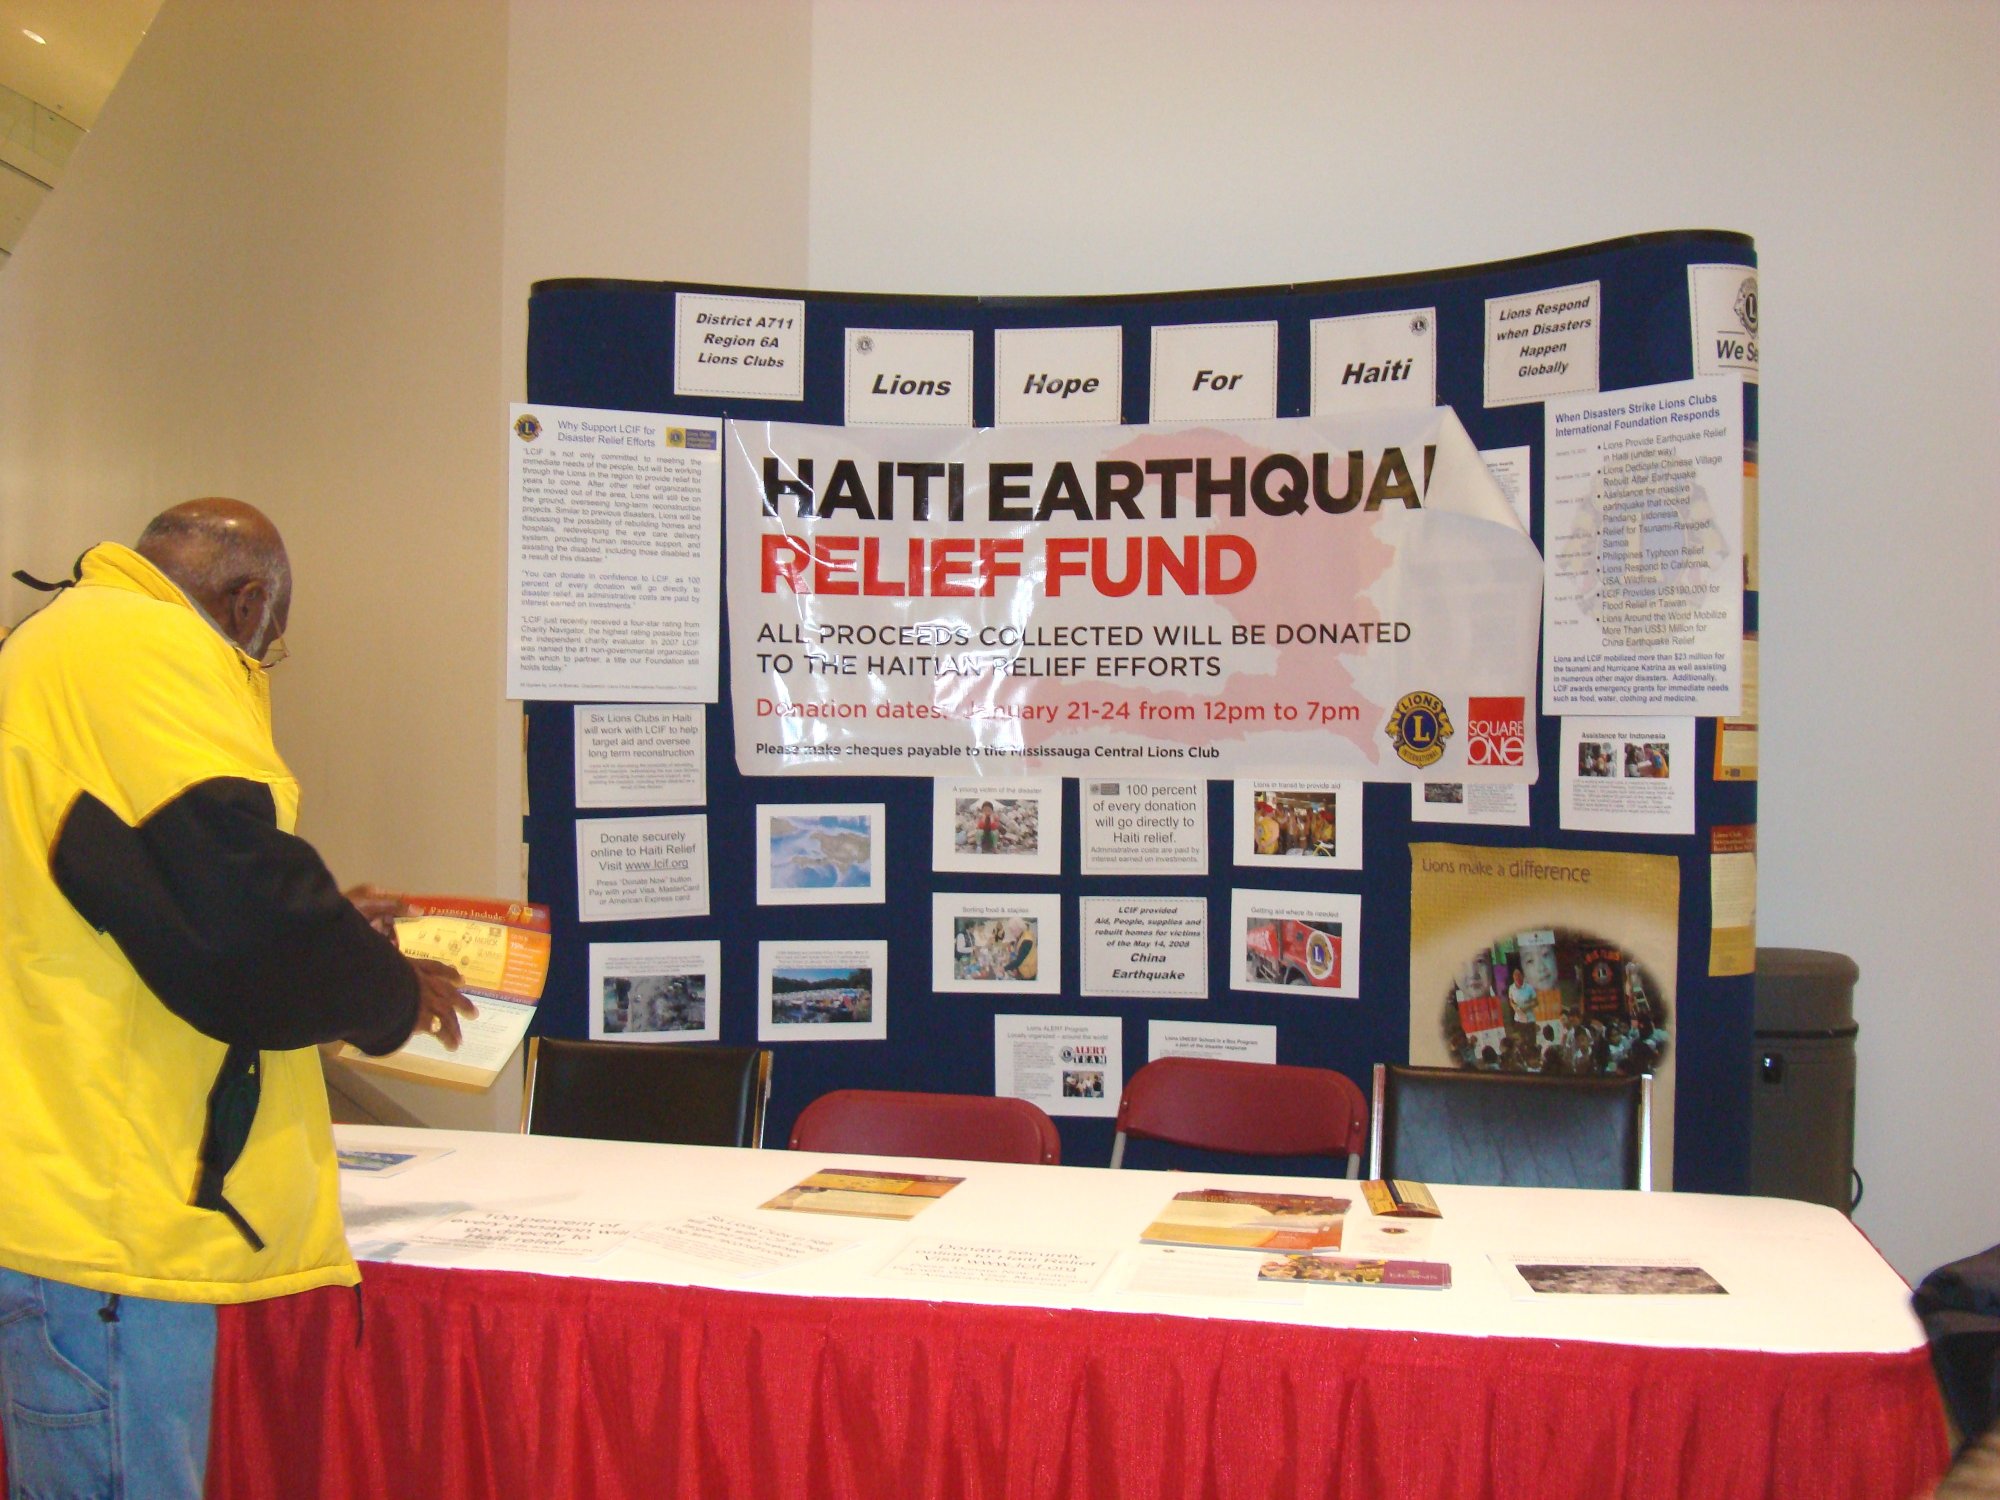 Lions Haiti Relief5 - 23Jan2010.jpg Square One Shopping Centre Upper Level Cityside Booth